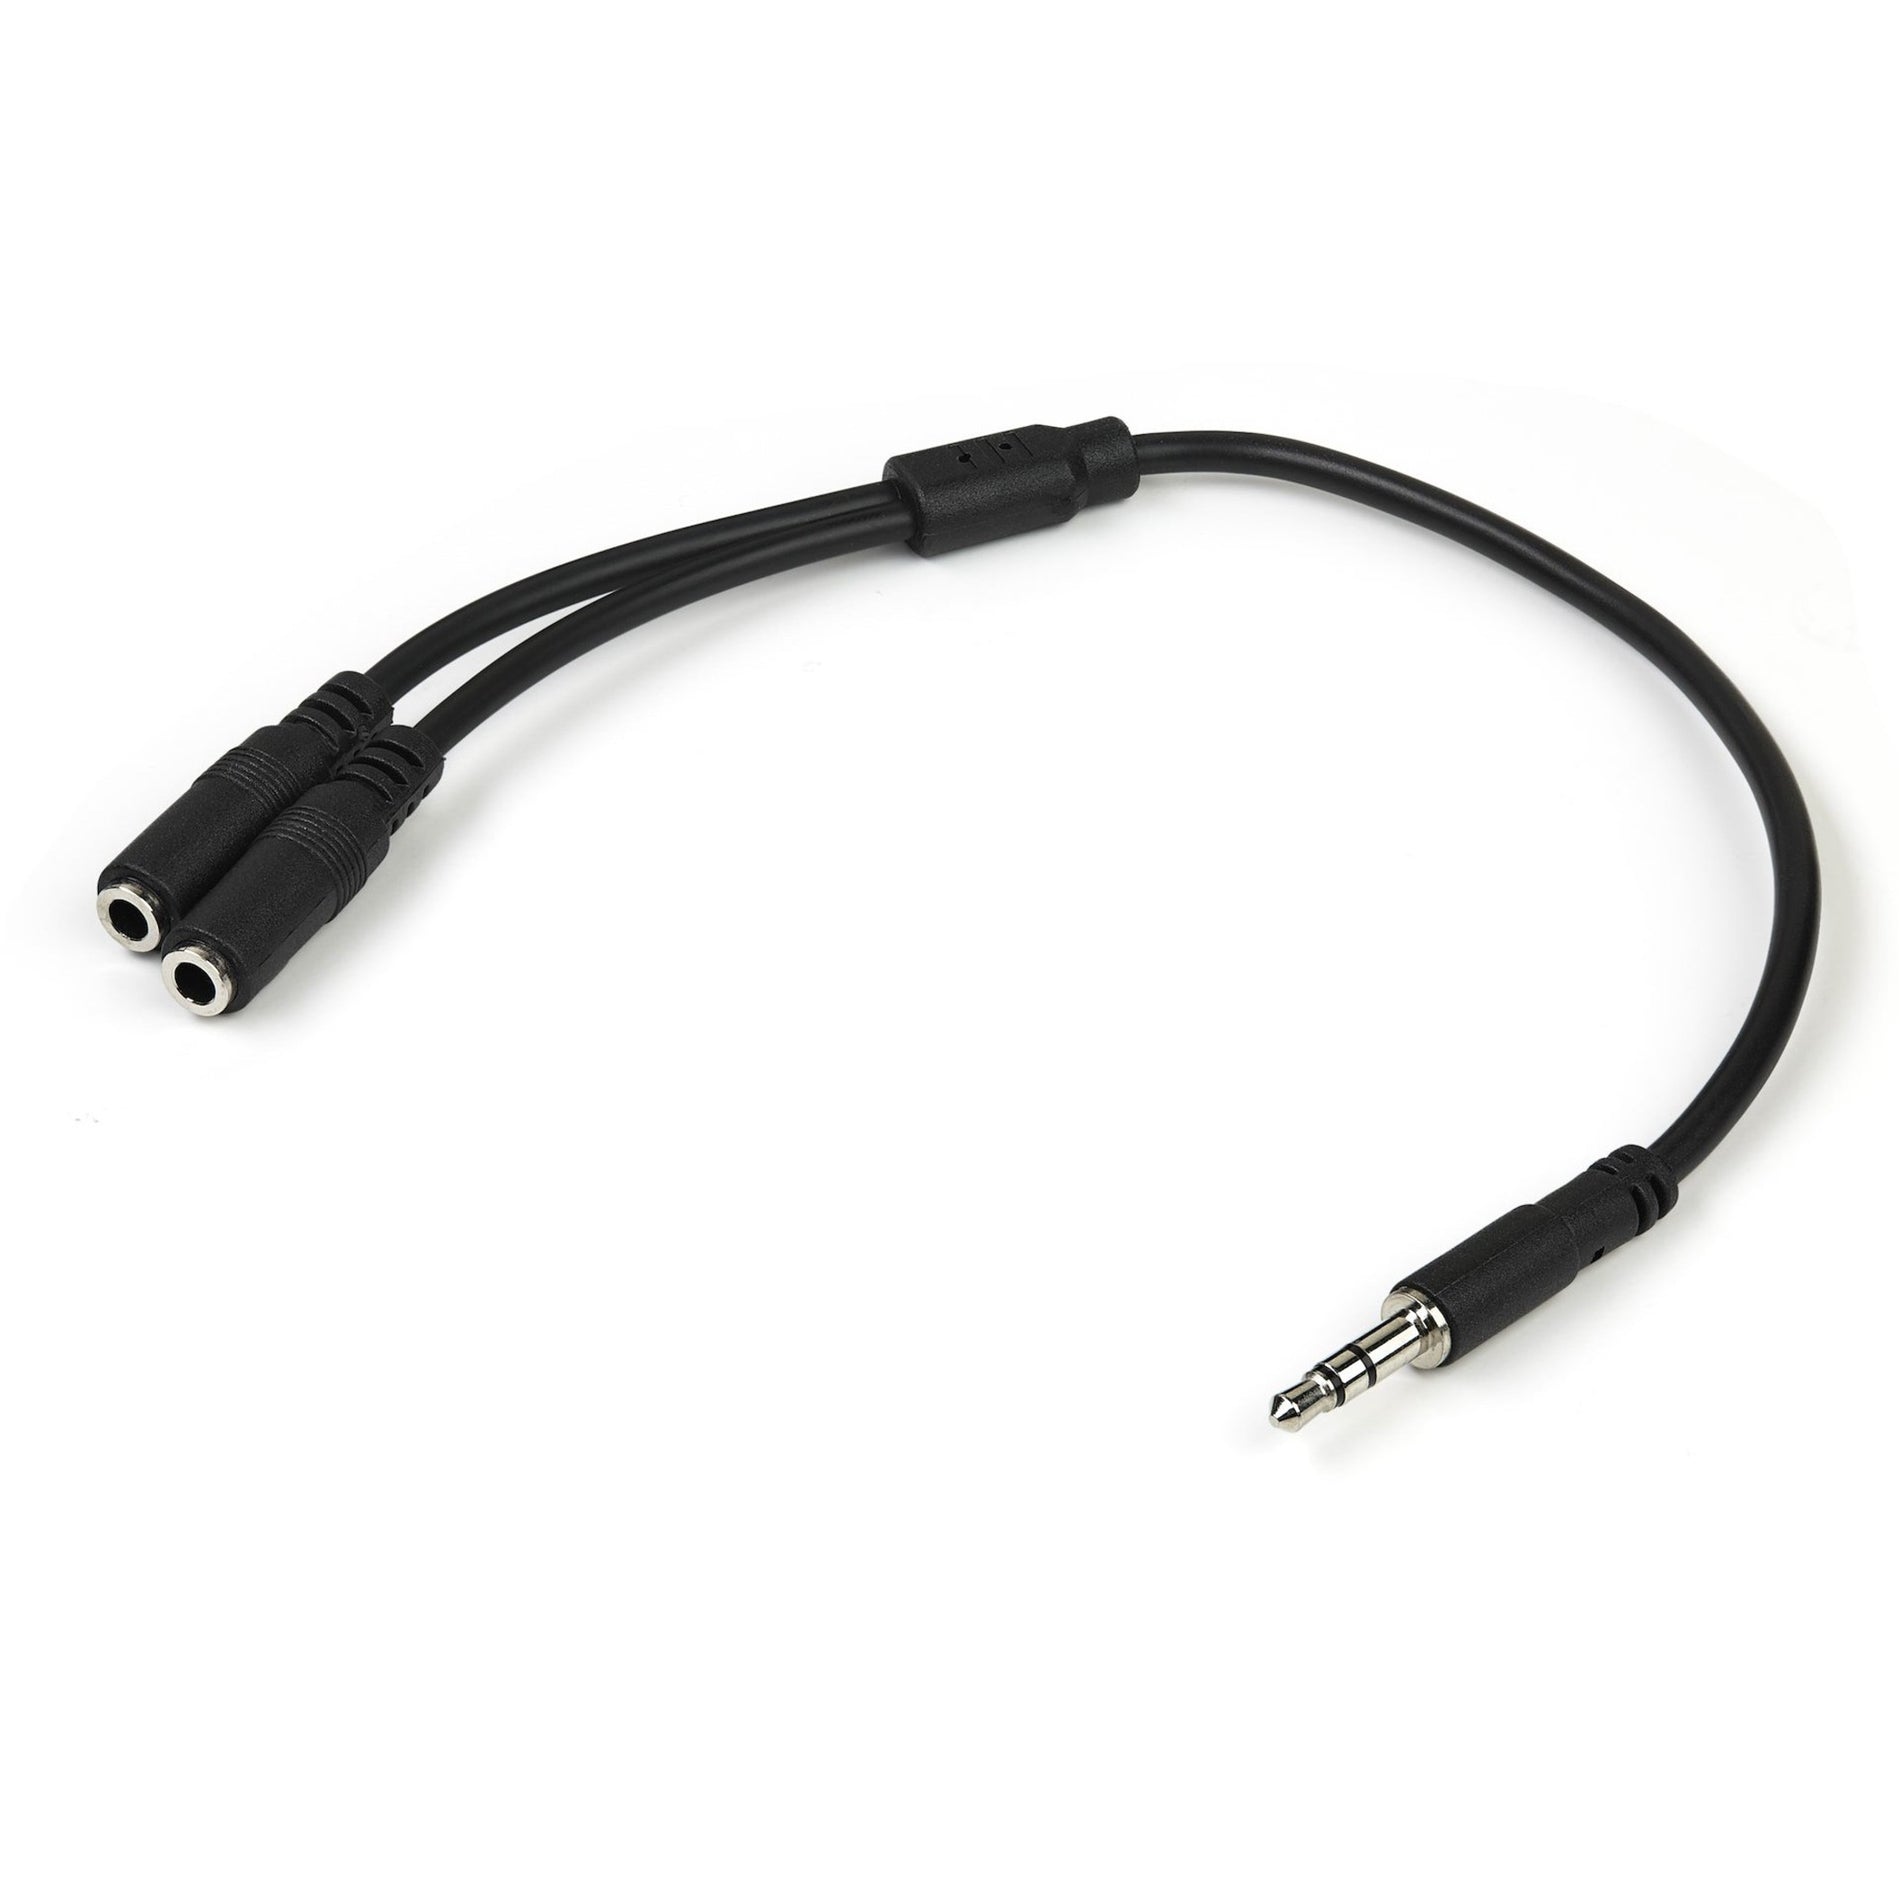 StarTech.com MUY1MFFS Slim Stereo Splitter Cable - Connect Headphones and External Speakers Simultaneously